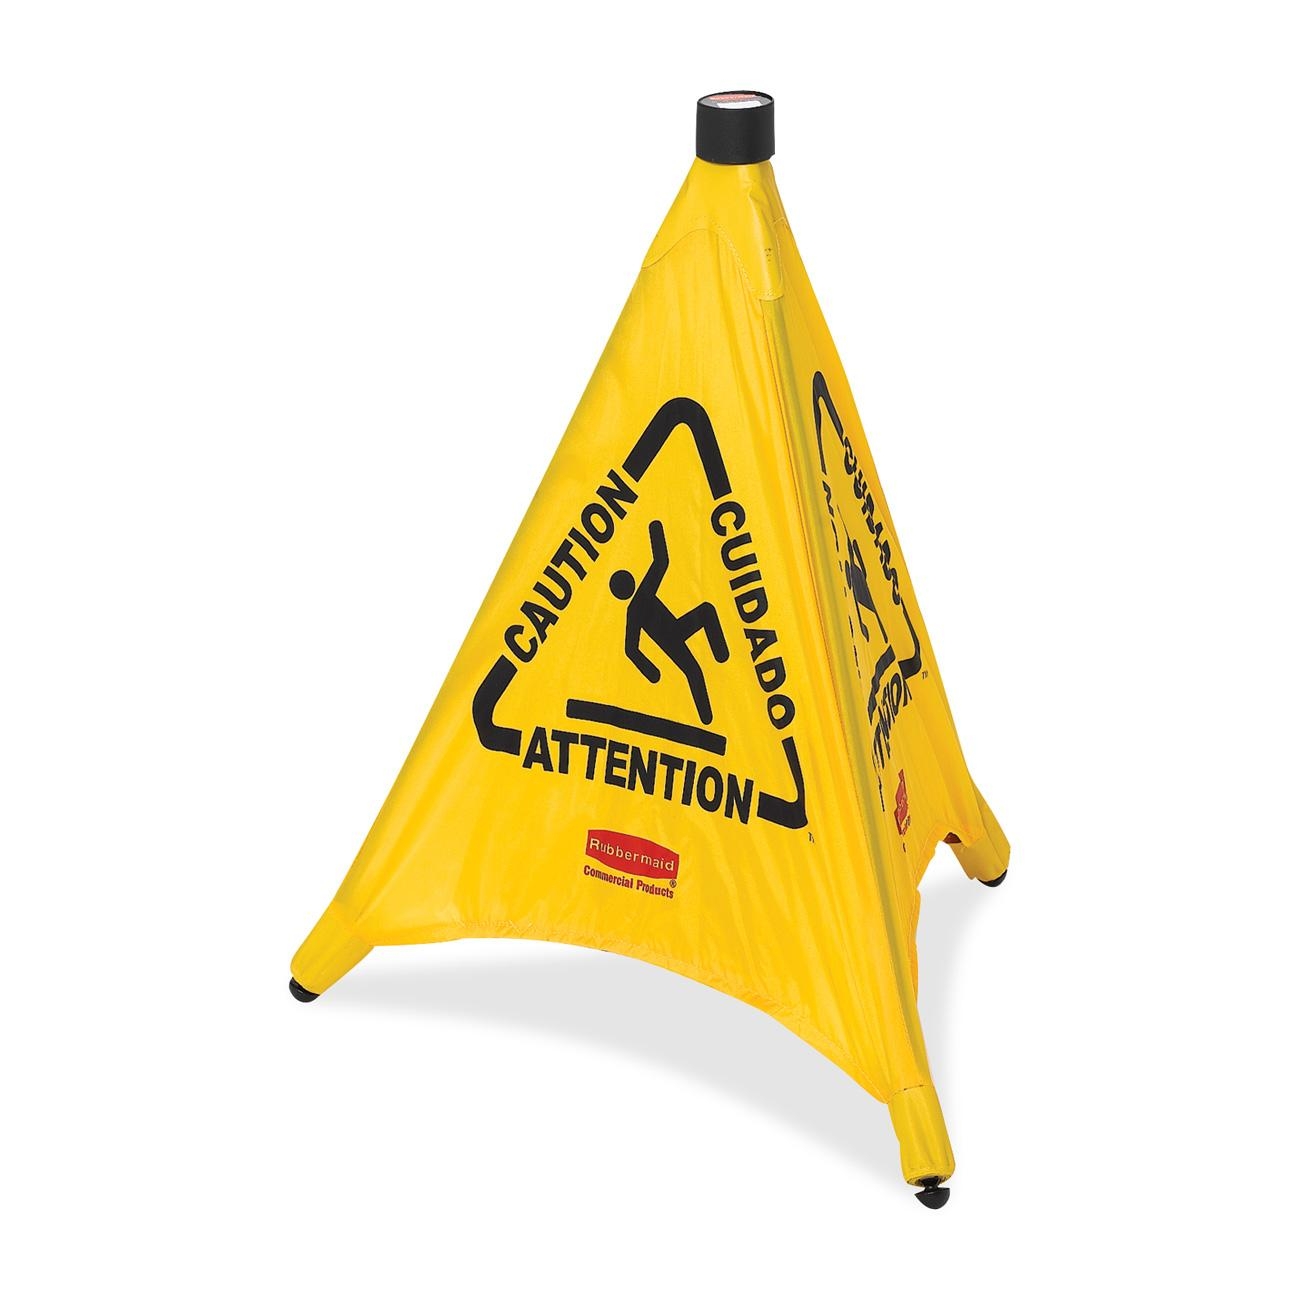 Rubbermaid 9s0000yw Multi Lingual Caution Safety Cone Caution